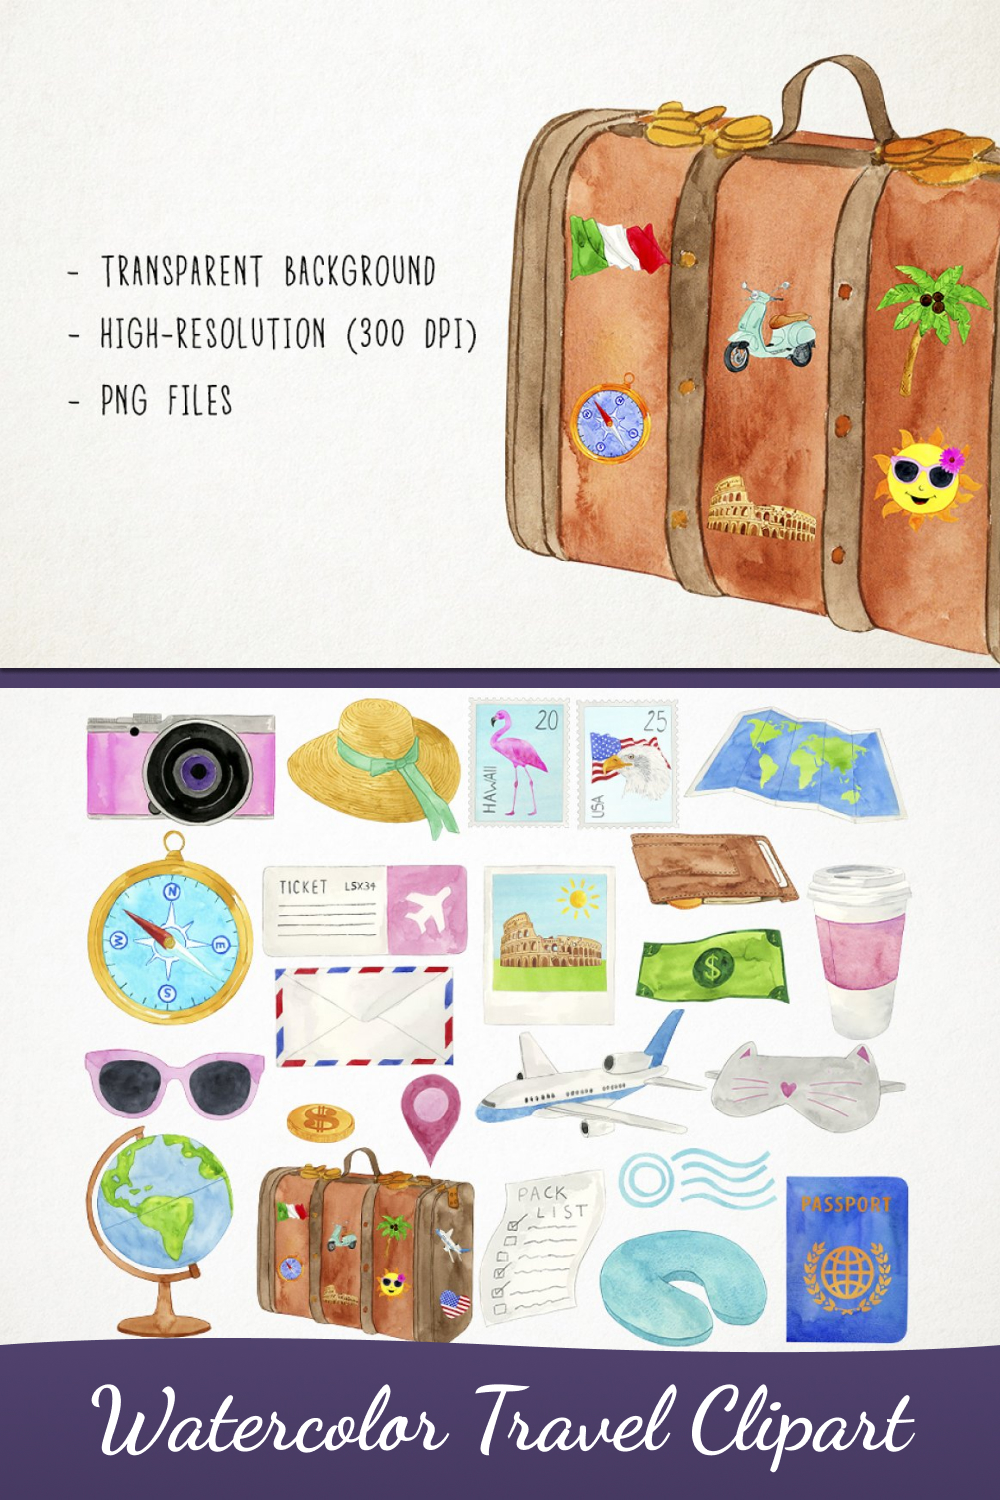 Watercolor travel clipart of pinterest.